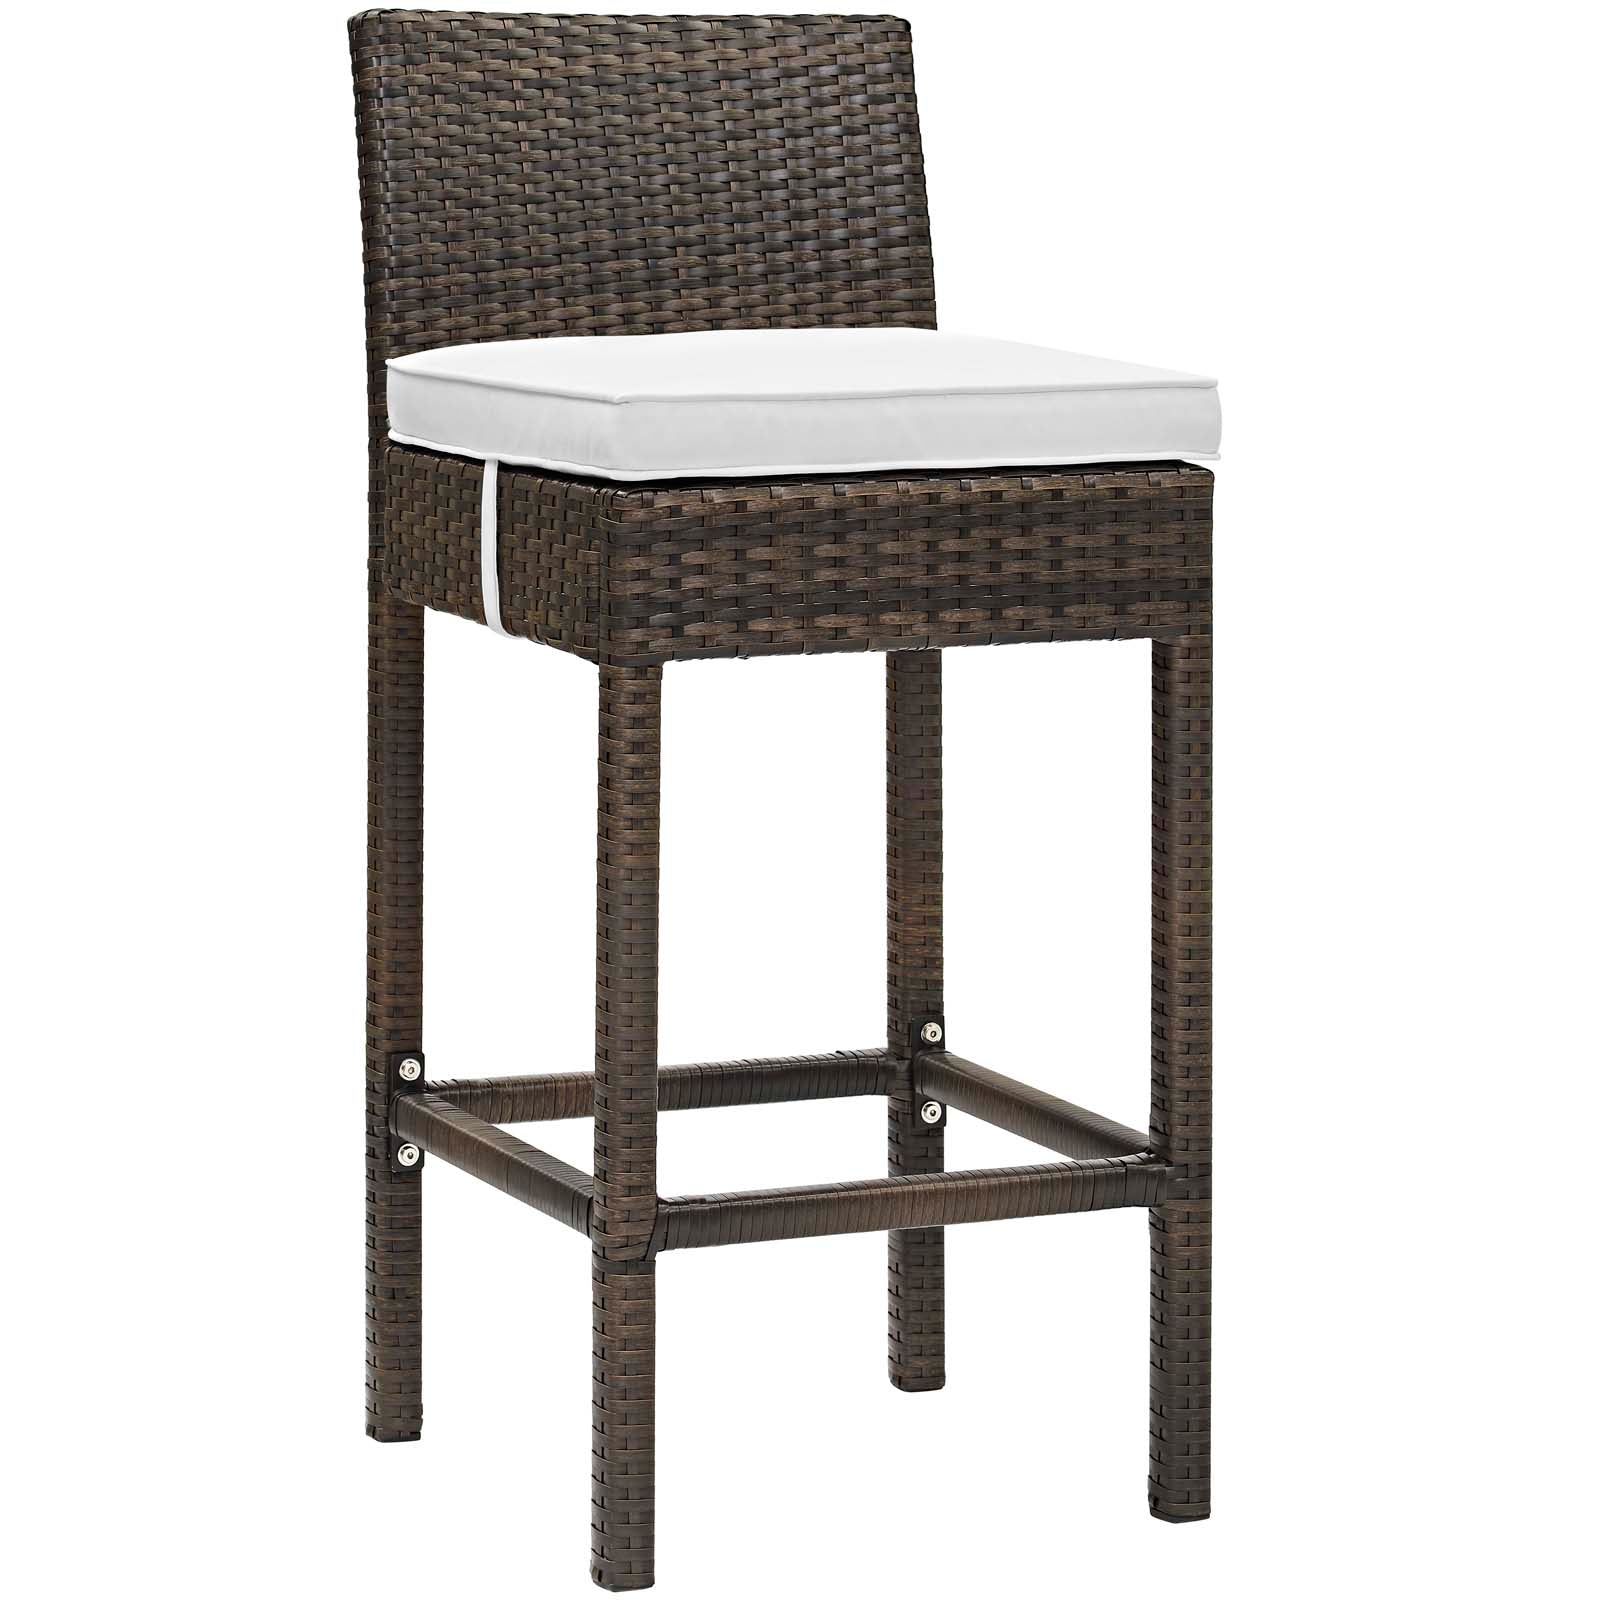 Modway Outdoor Barstools - Conduit Bar Stool Outdoor Patio Wicker Rattan Set of 4 Brown White